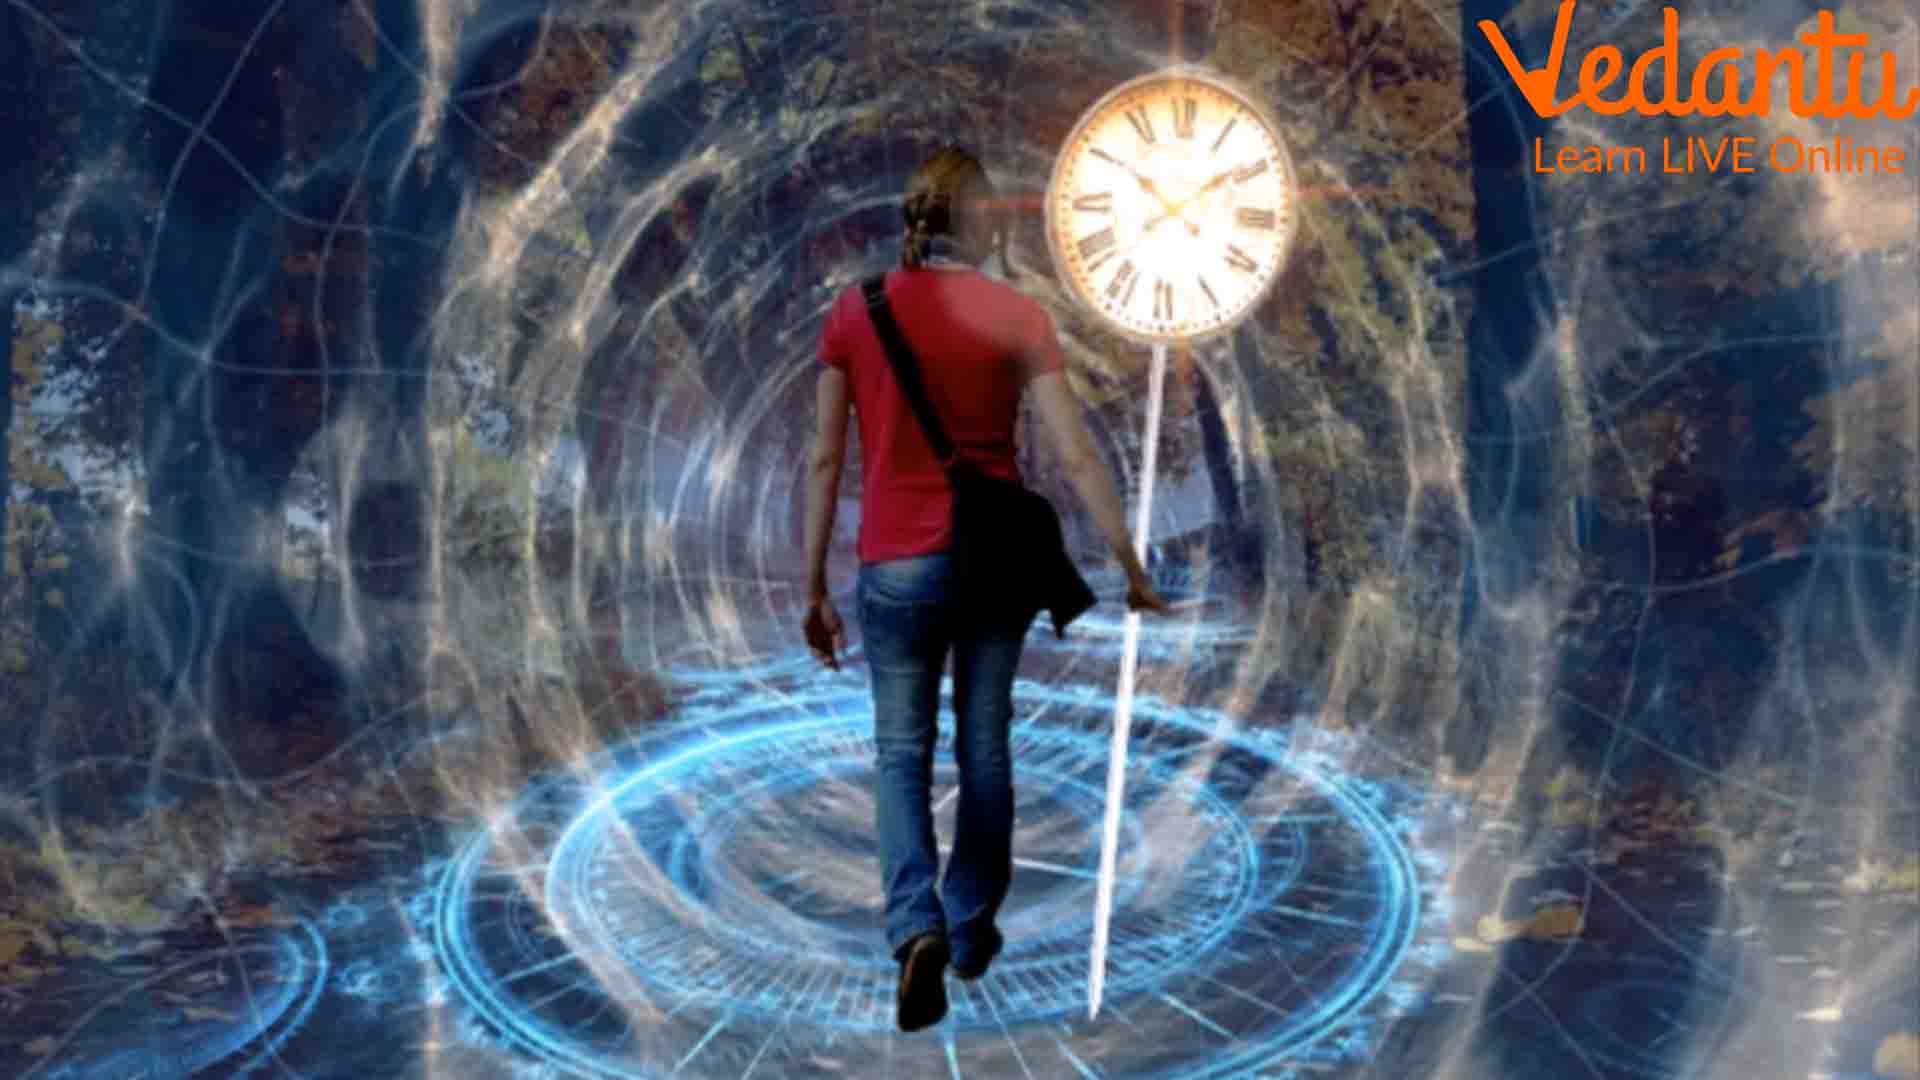 is time travel possible or not